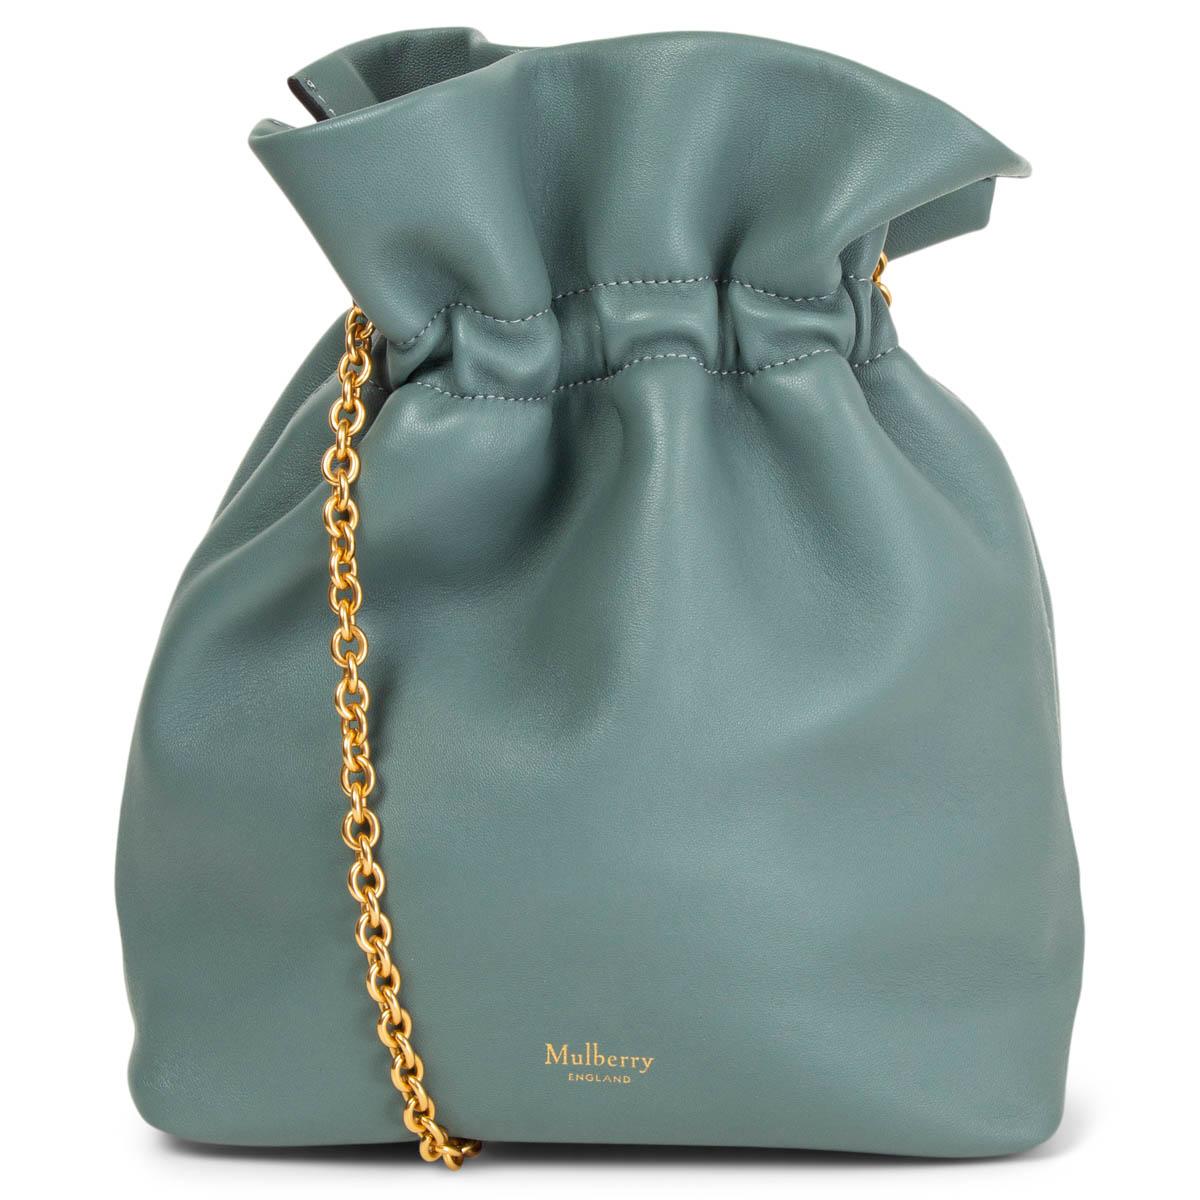 100% authentic Mulberry mini Lynton bucket bag in Antique Celeste (grey-green-blue) smooth lamb nappa leather with the label's moniker in gold-tone lettering at front. Comes with a gold-tone metal chain and is lined in deep burgundy leather with one